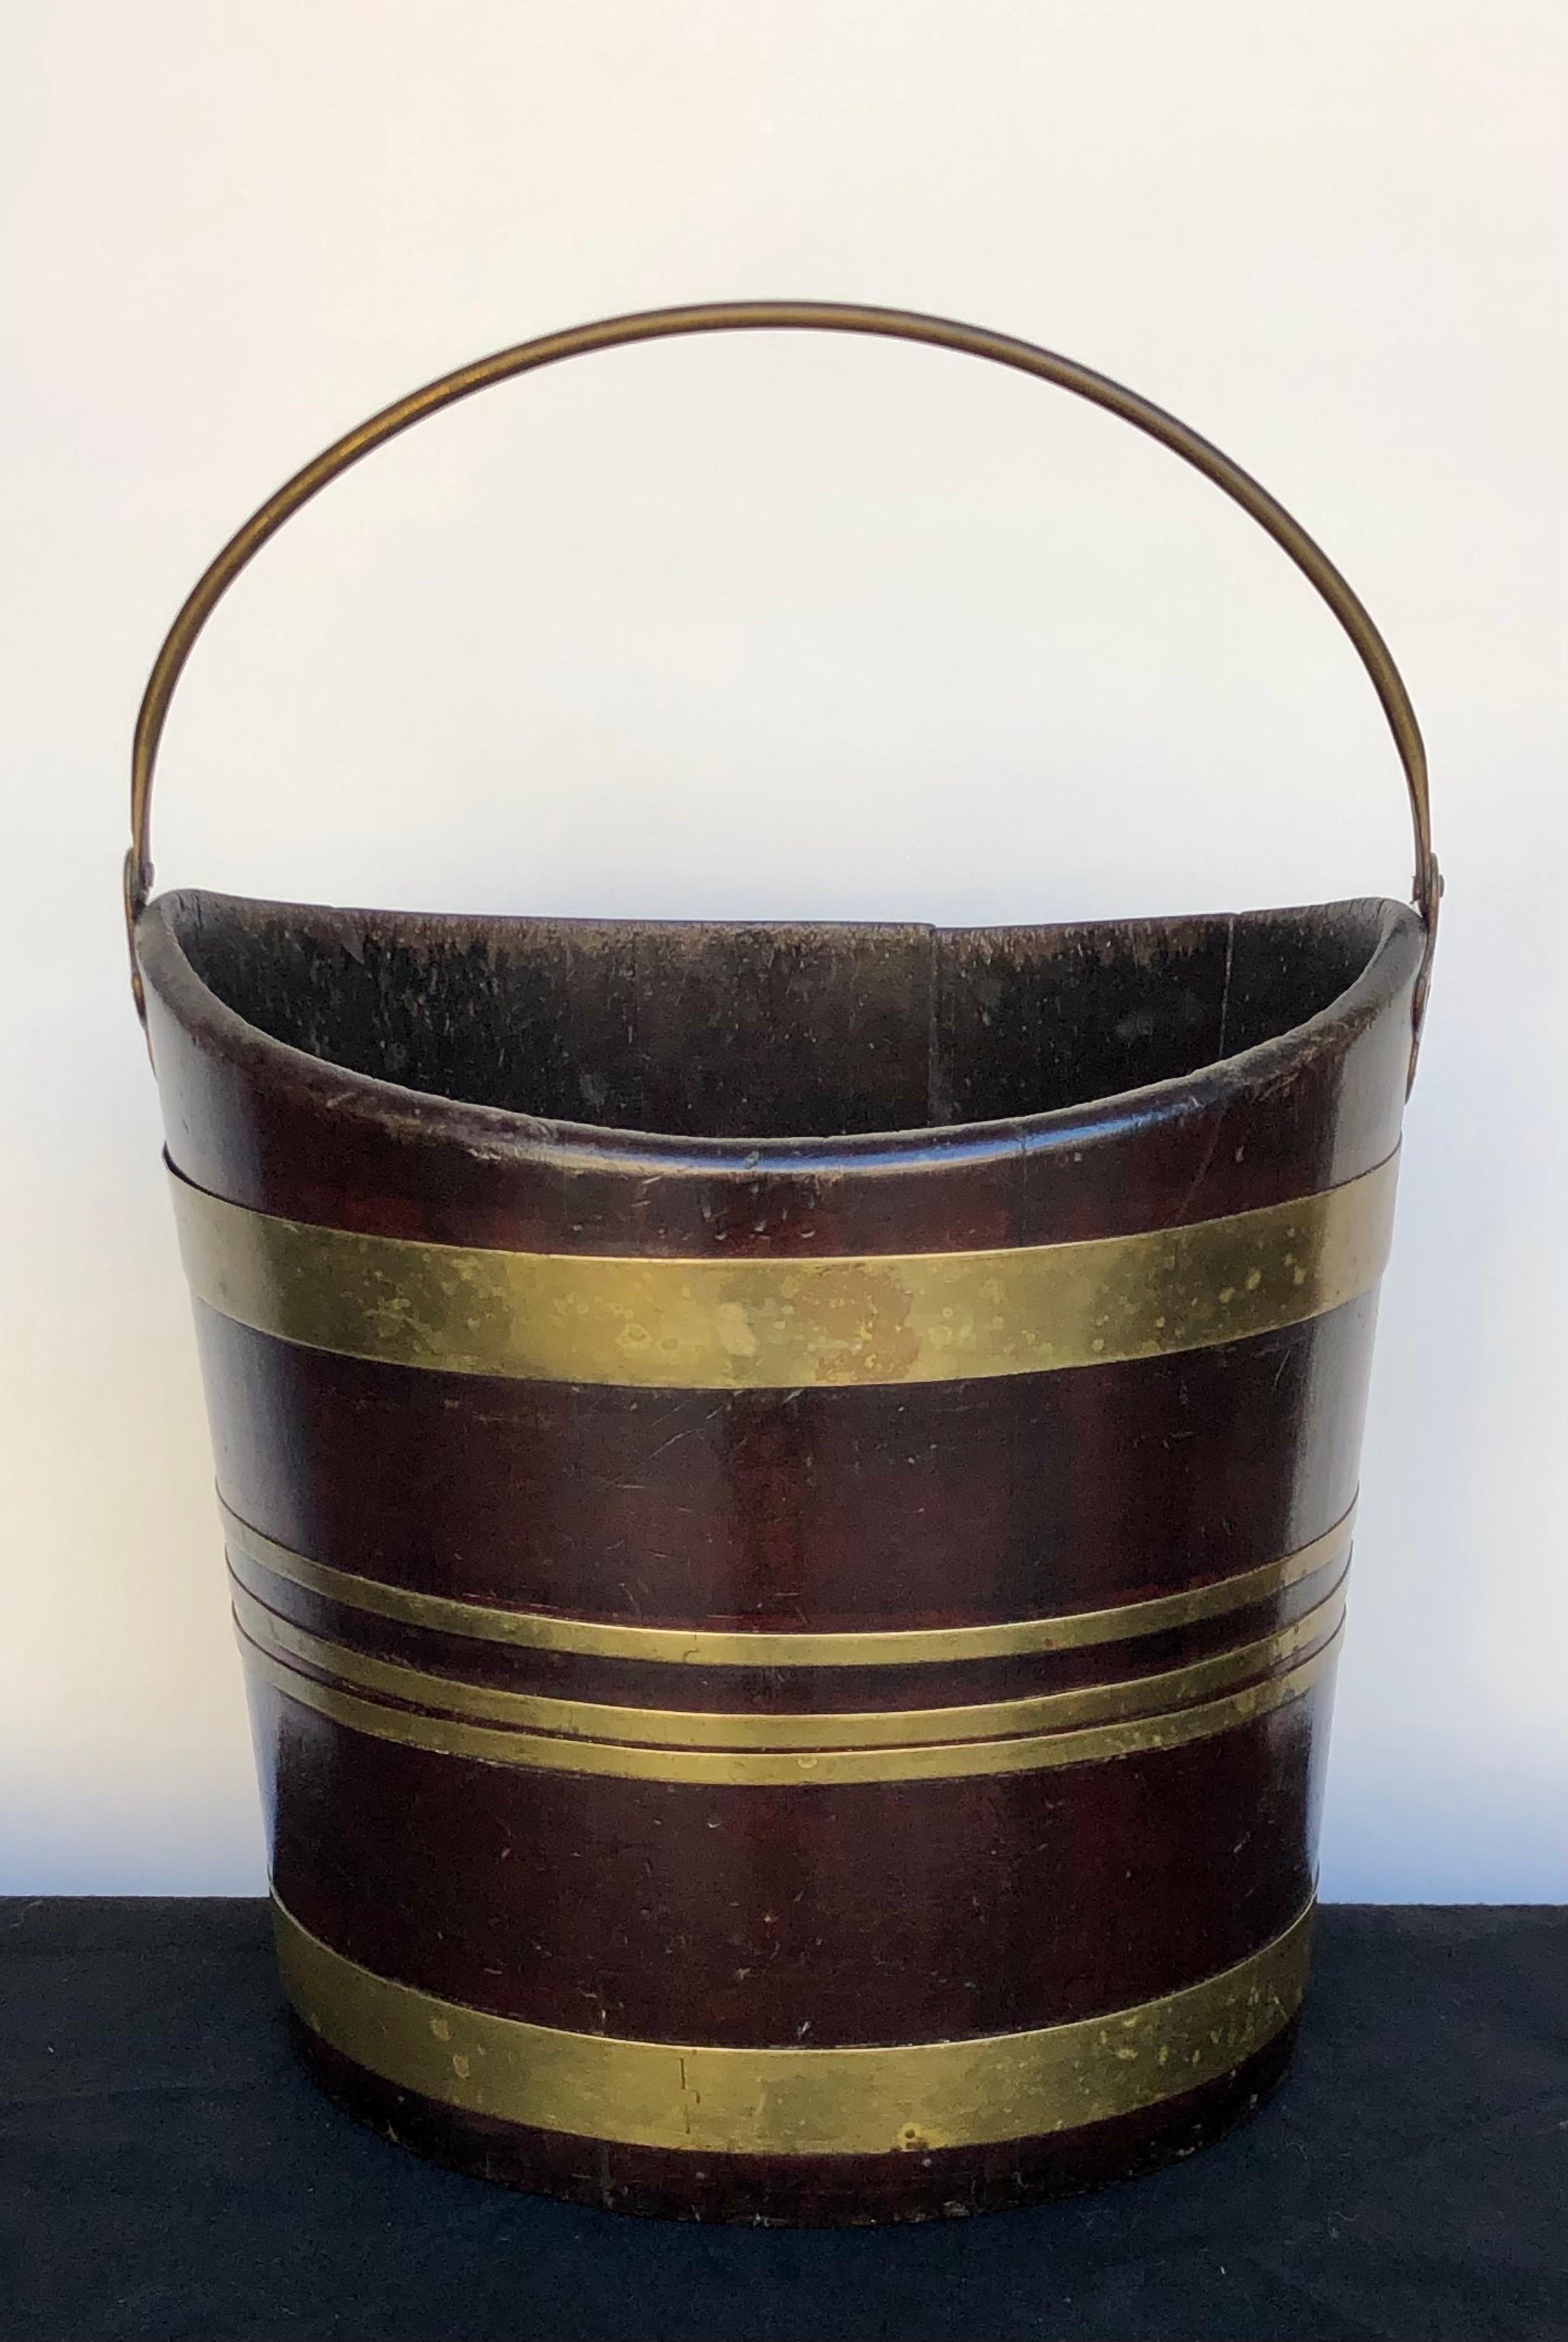 This wonderful Labeled Regency brass-bound mahogany navette form peat bucket / fire bucket was made in England in the early 19th century. The Navette Form peat bucket is handmade with coopered mahogany staves and bound together in brass bands with